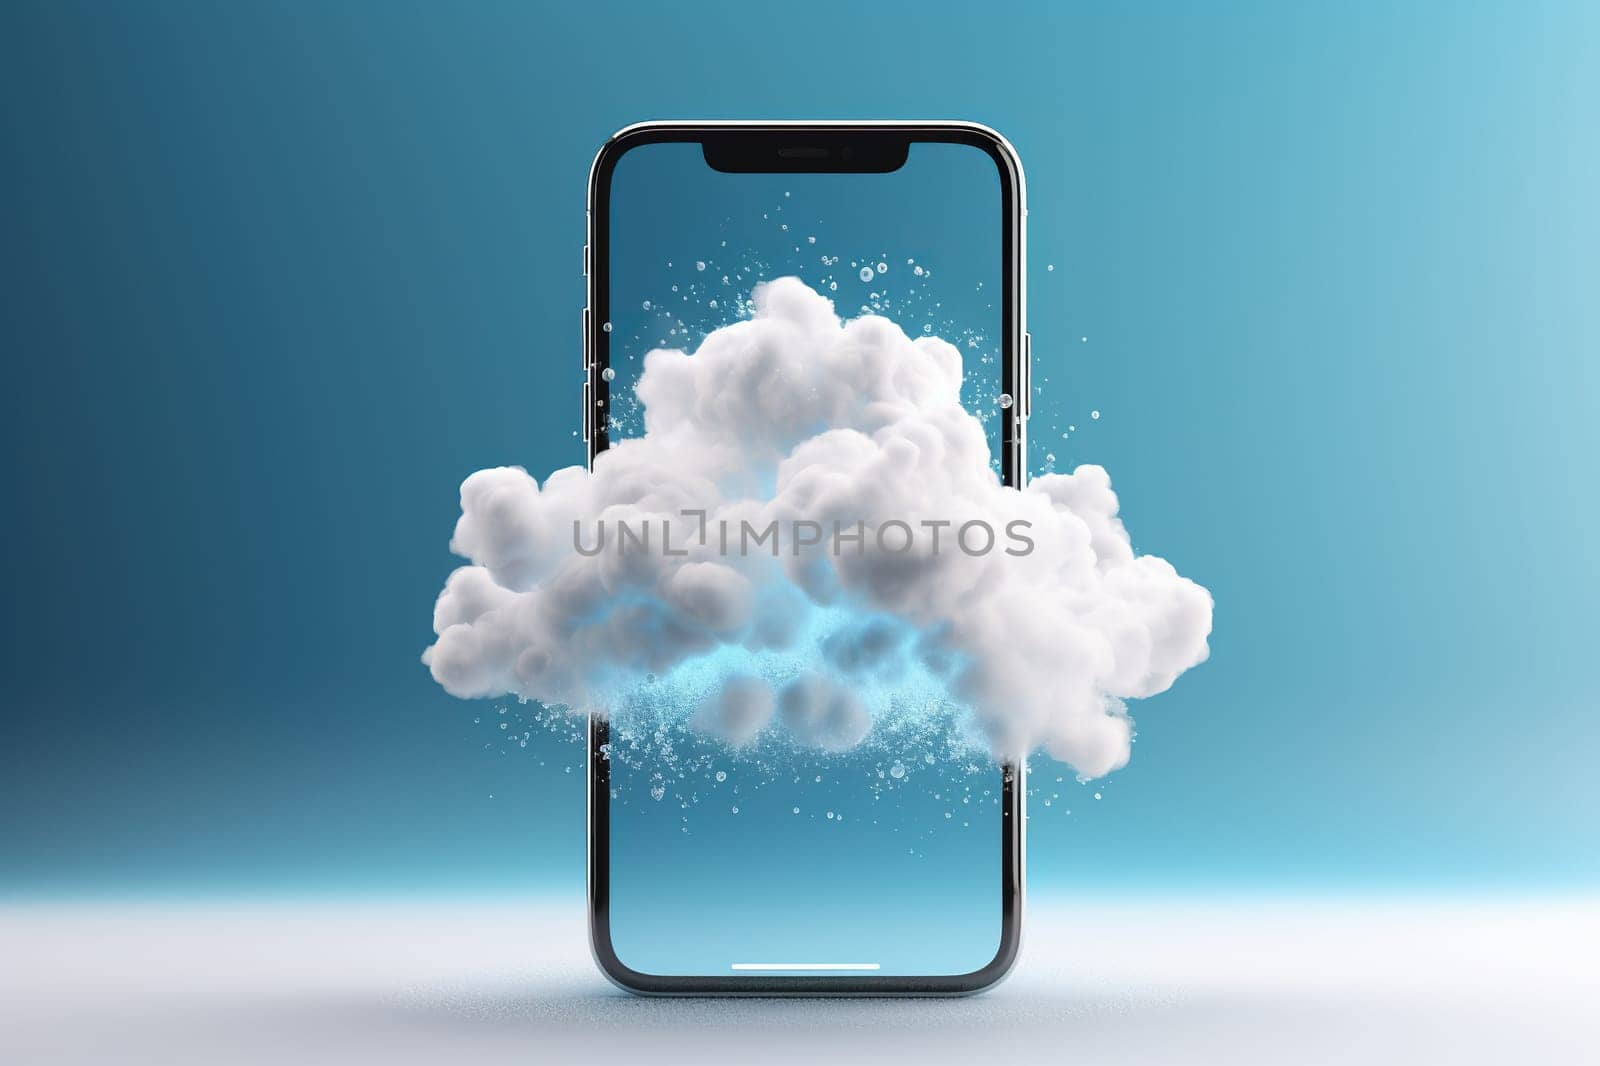 Realistic image of clouds on a smartphone screen. The concept of high-quality photographs on a smartphone. Generated by artificial intelligence by Vovmar